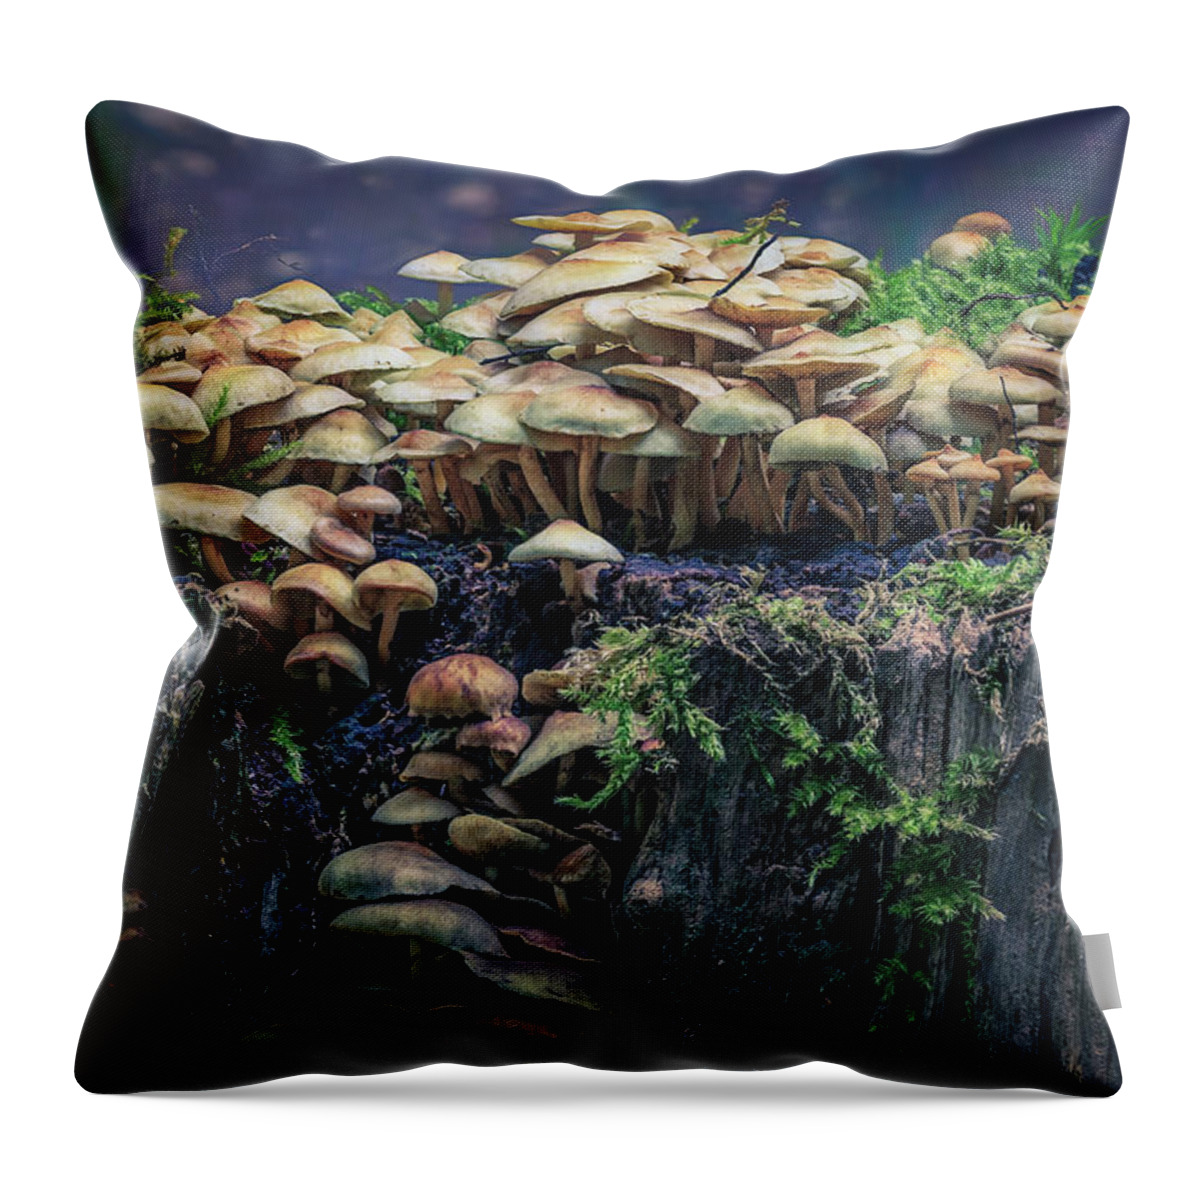 Autumn Throw Pillow featuring the photograph Magical Mushrooms by Tim Abeln